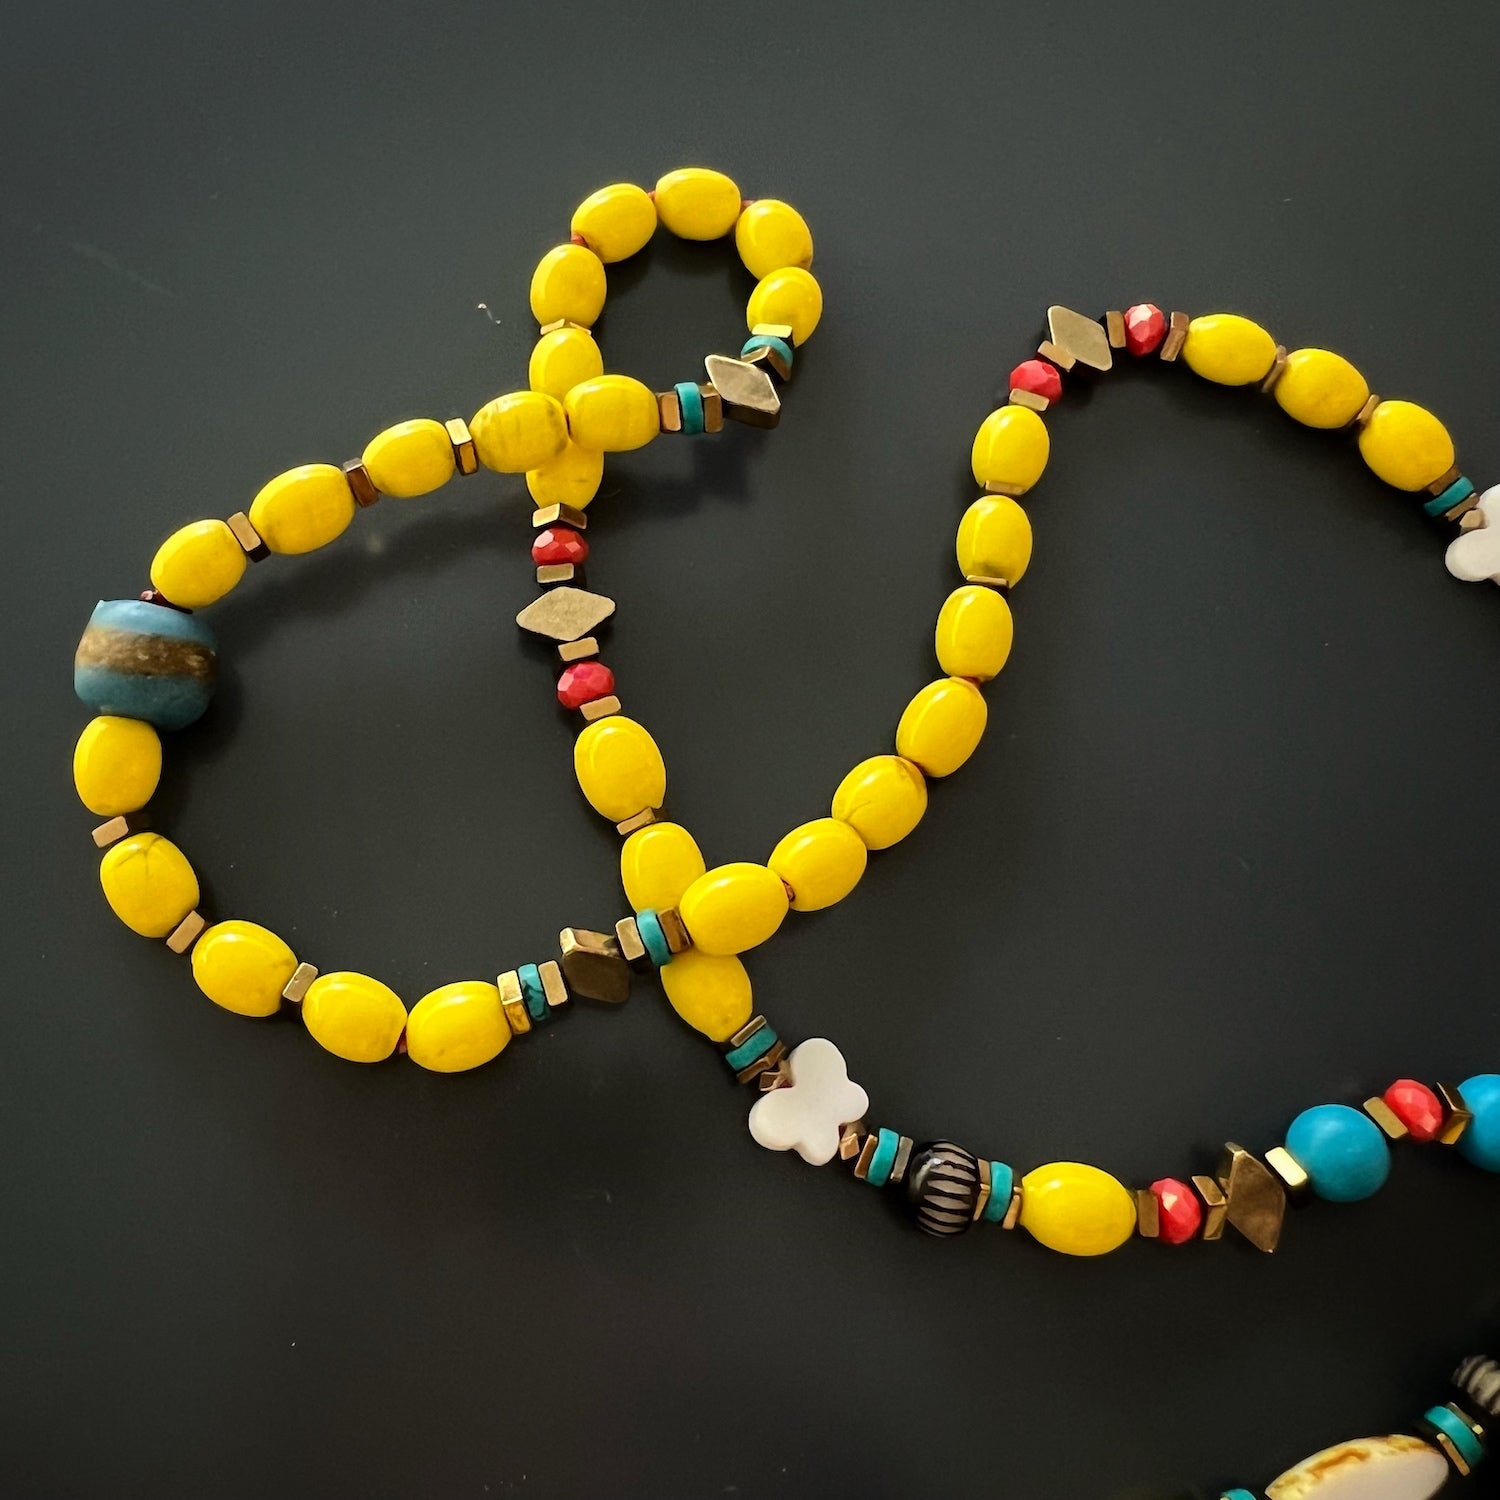 Carpe Diem Necklace featuring a vibrant combination of turquoise stone beads and African handmade beads, exuding style and positivity.